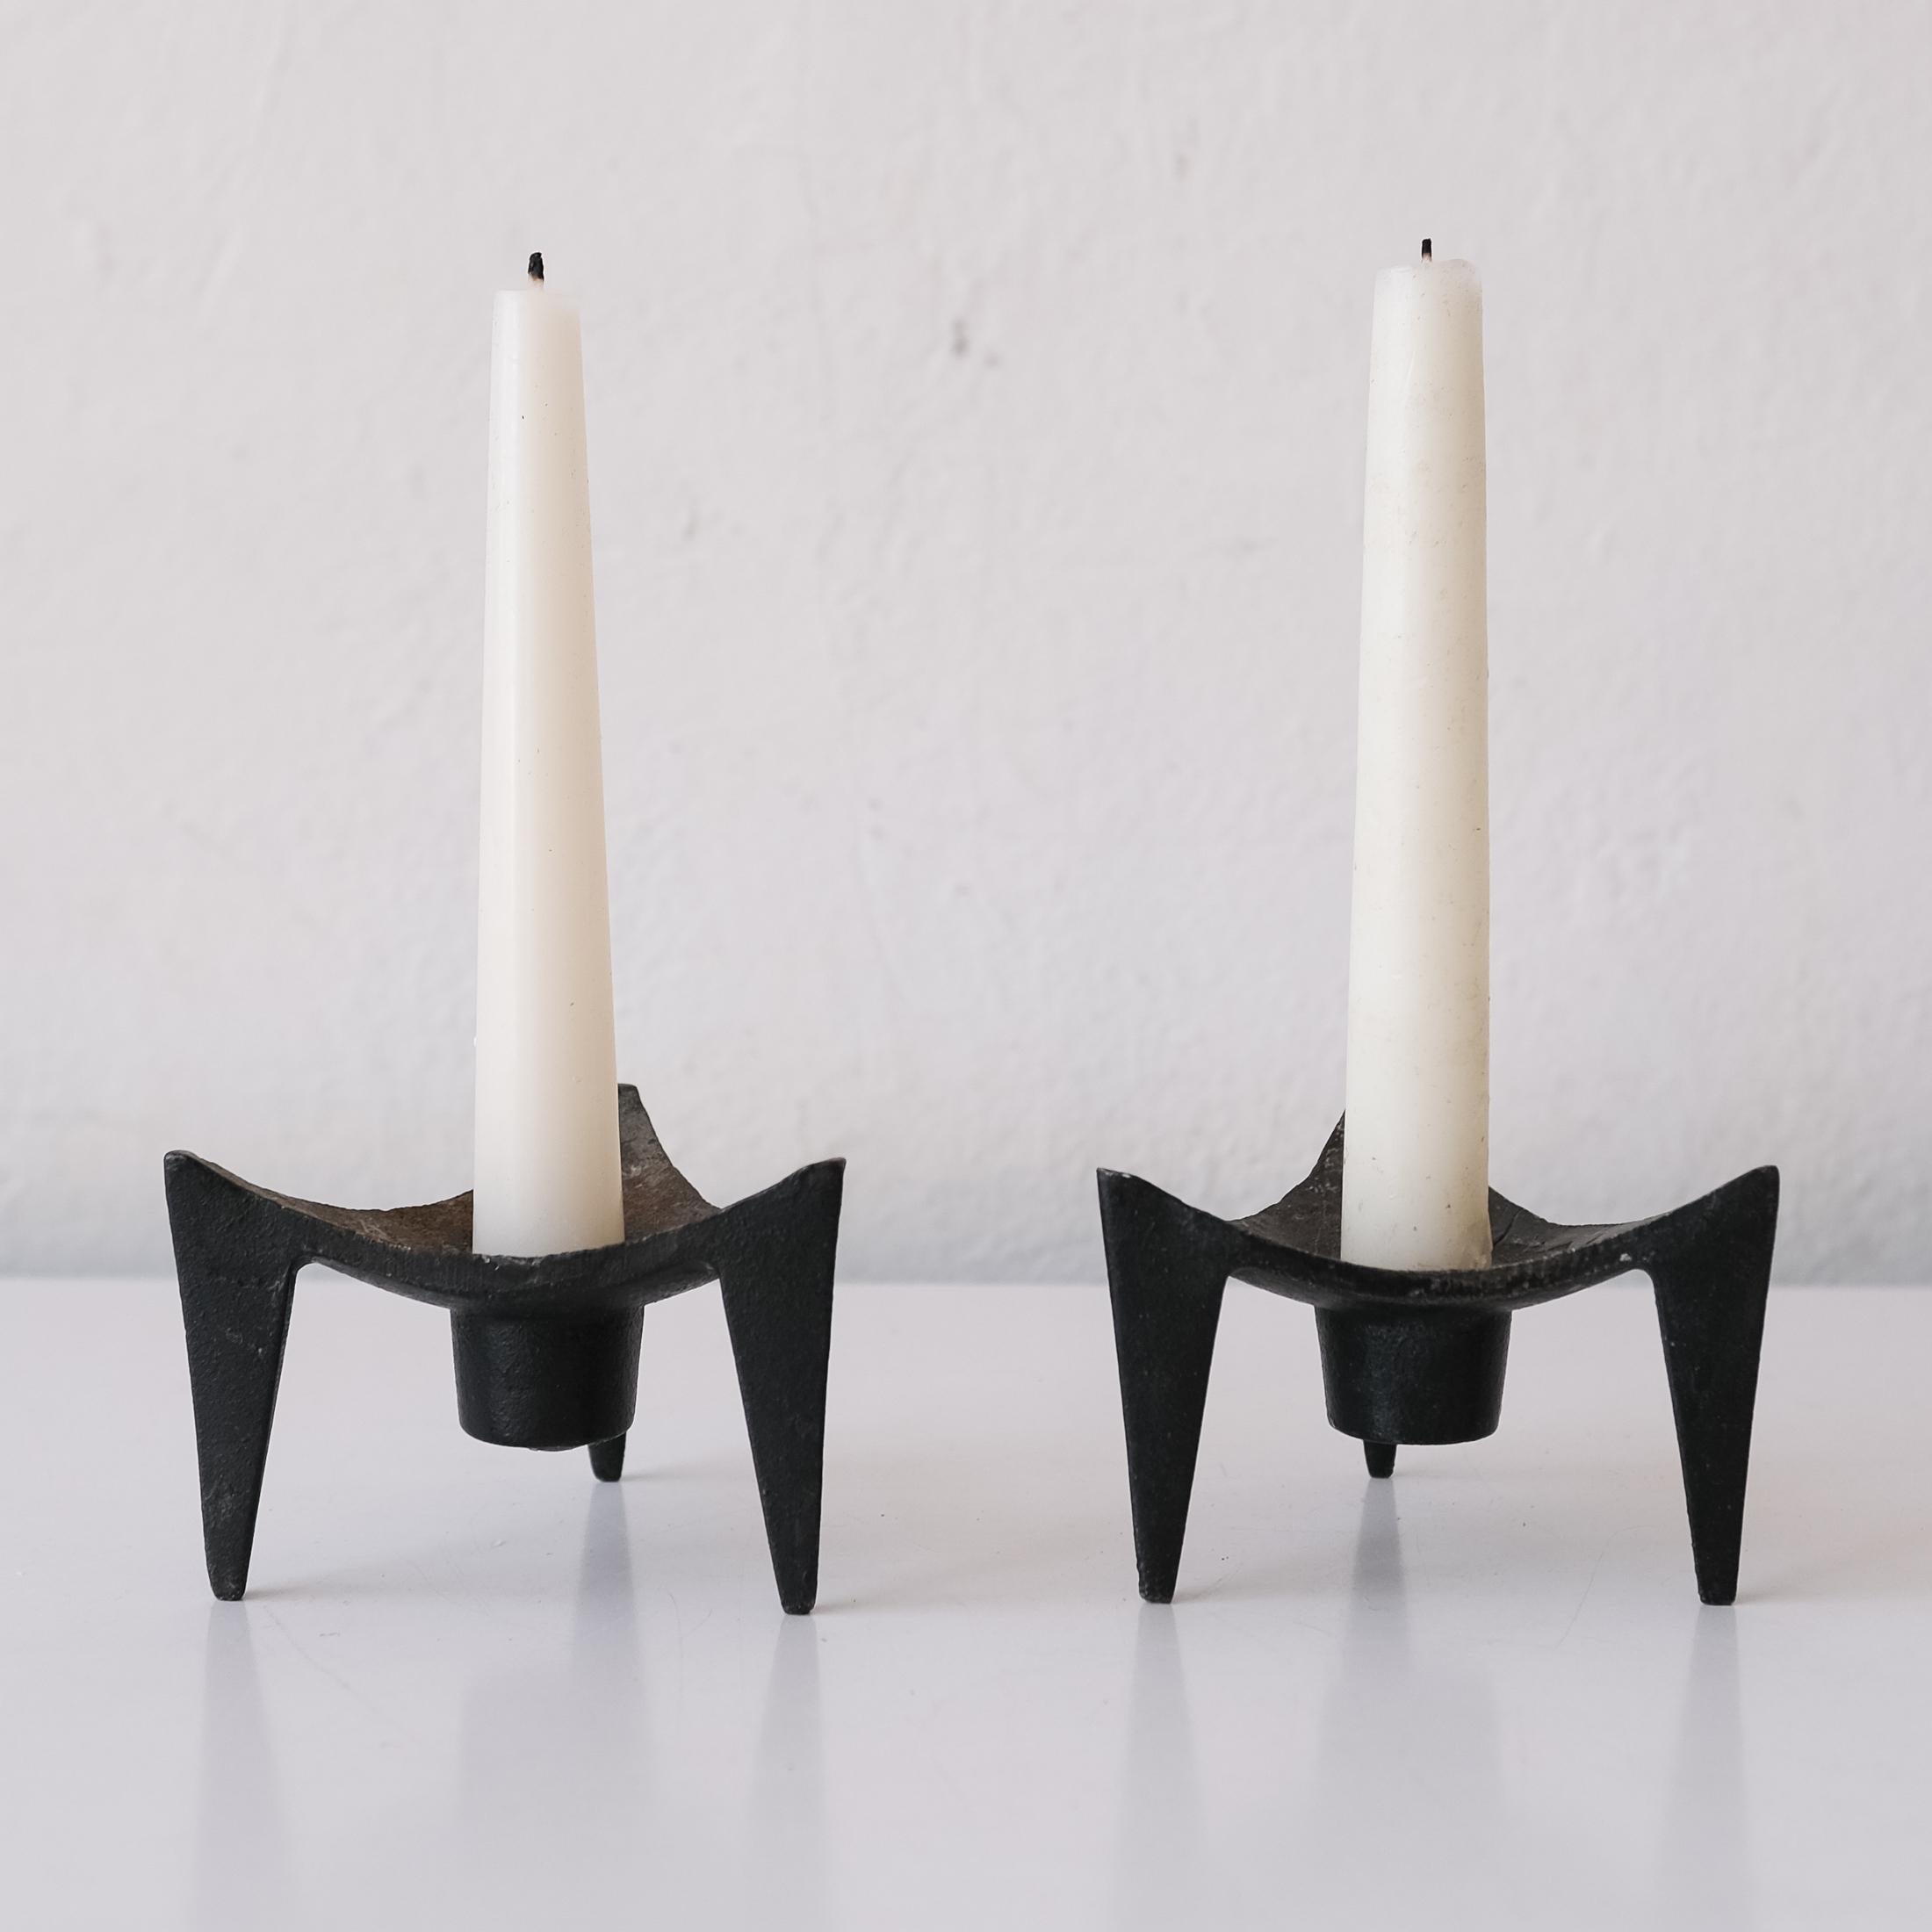 20th Century Mid-Century Modernist Japanese Iron Candle Holders For Sale